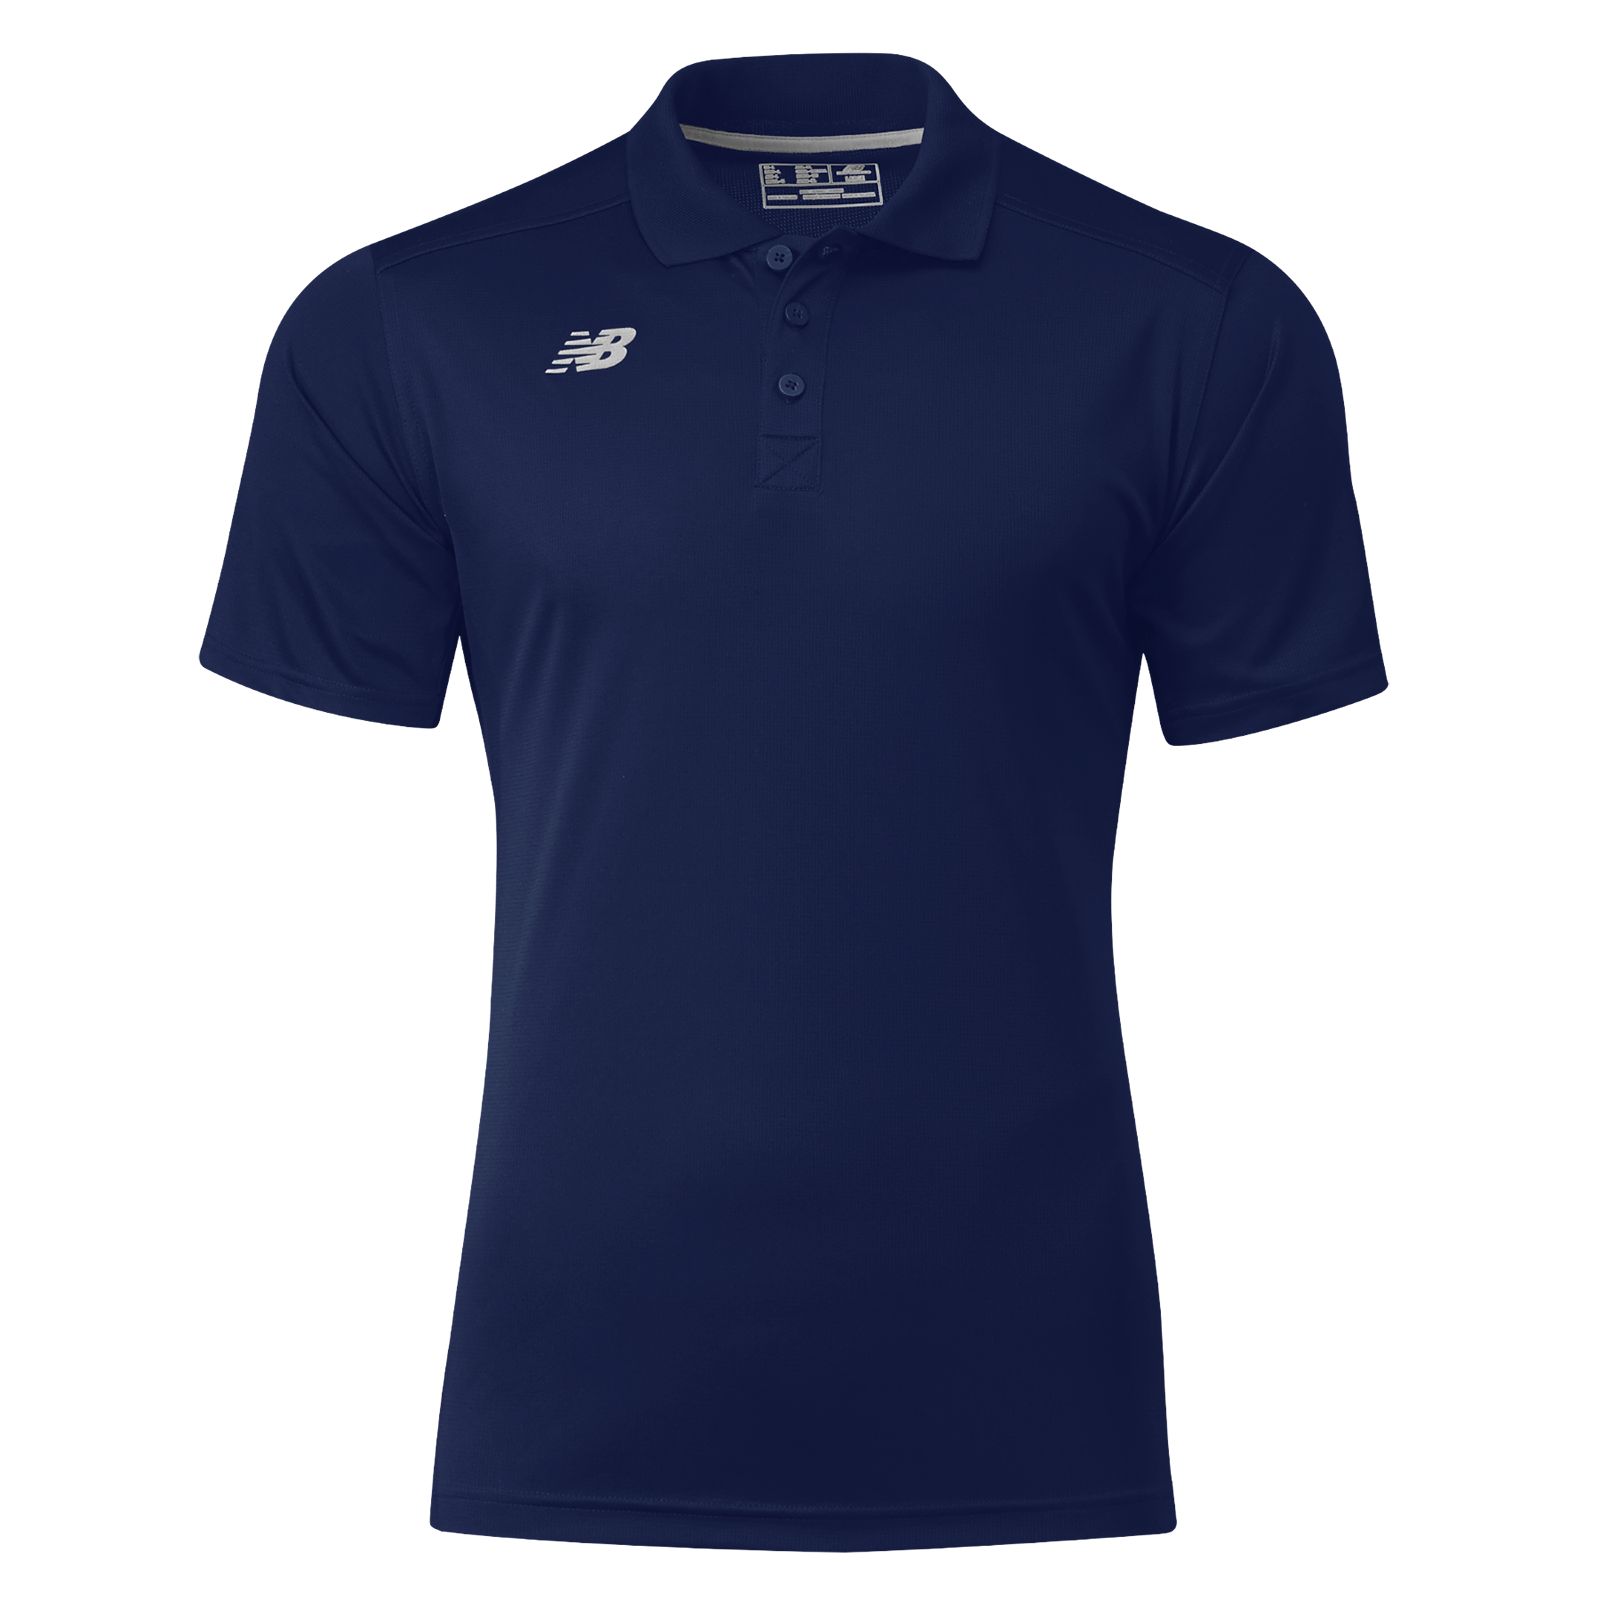 Men's Performance Tech Polo, Team Navy image number 0